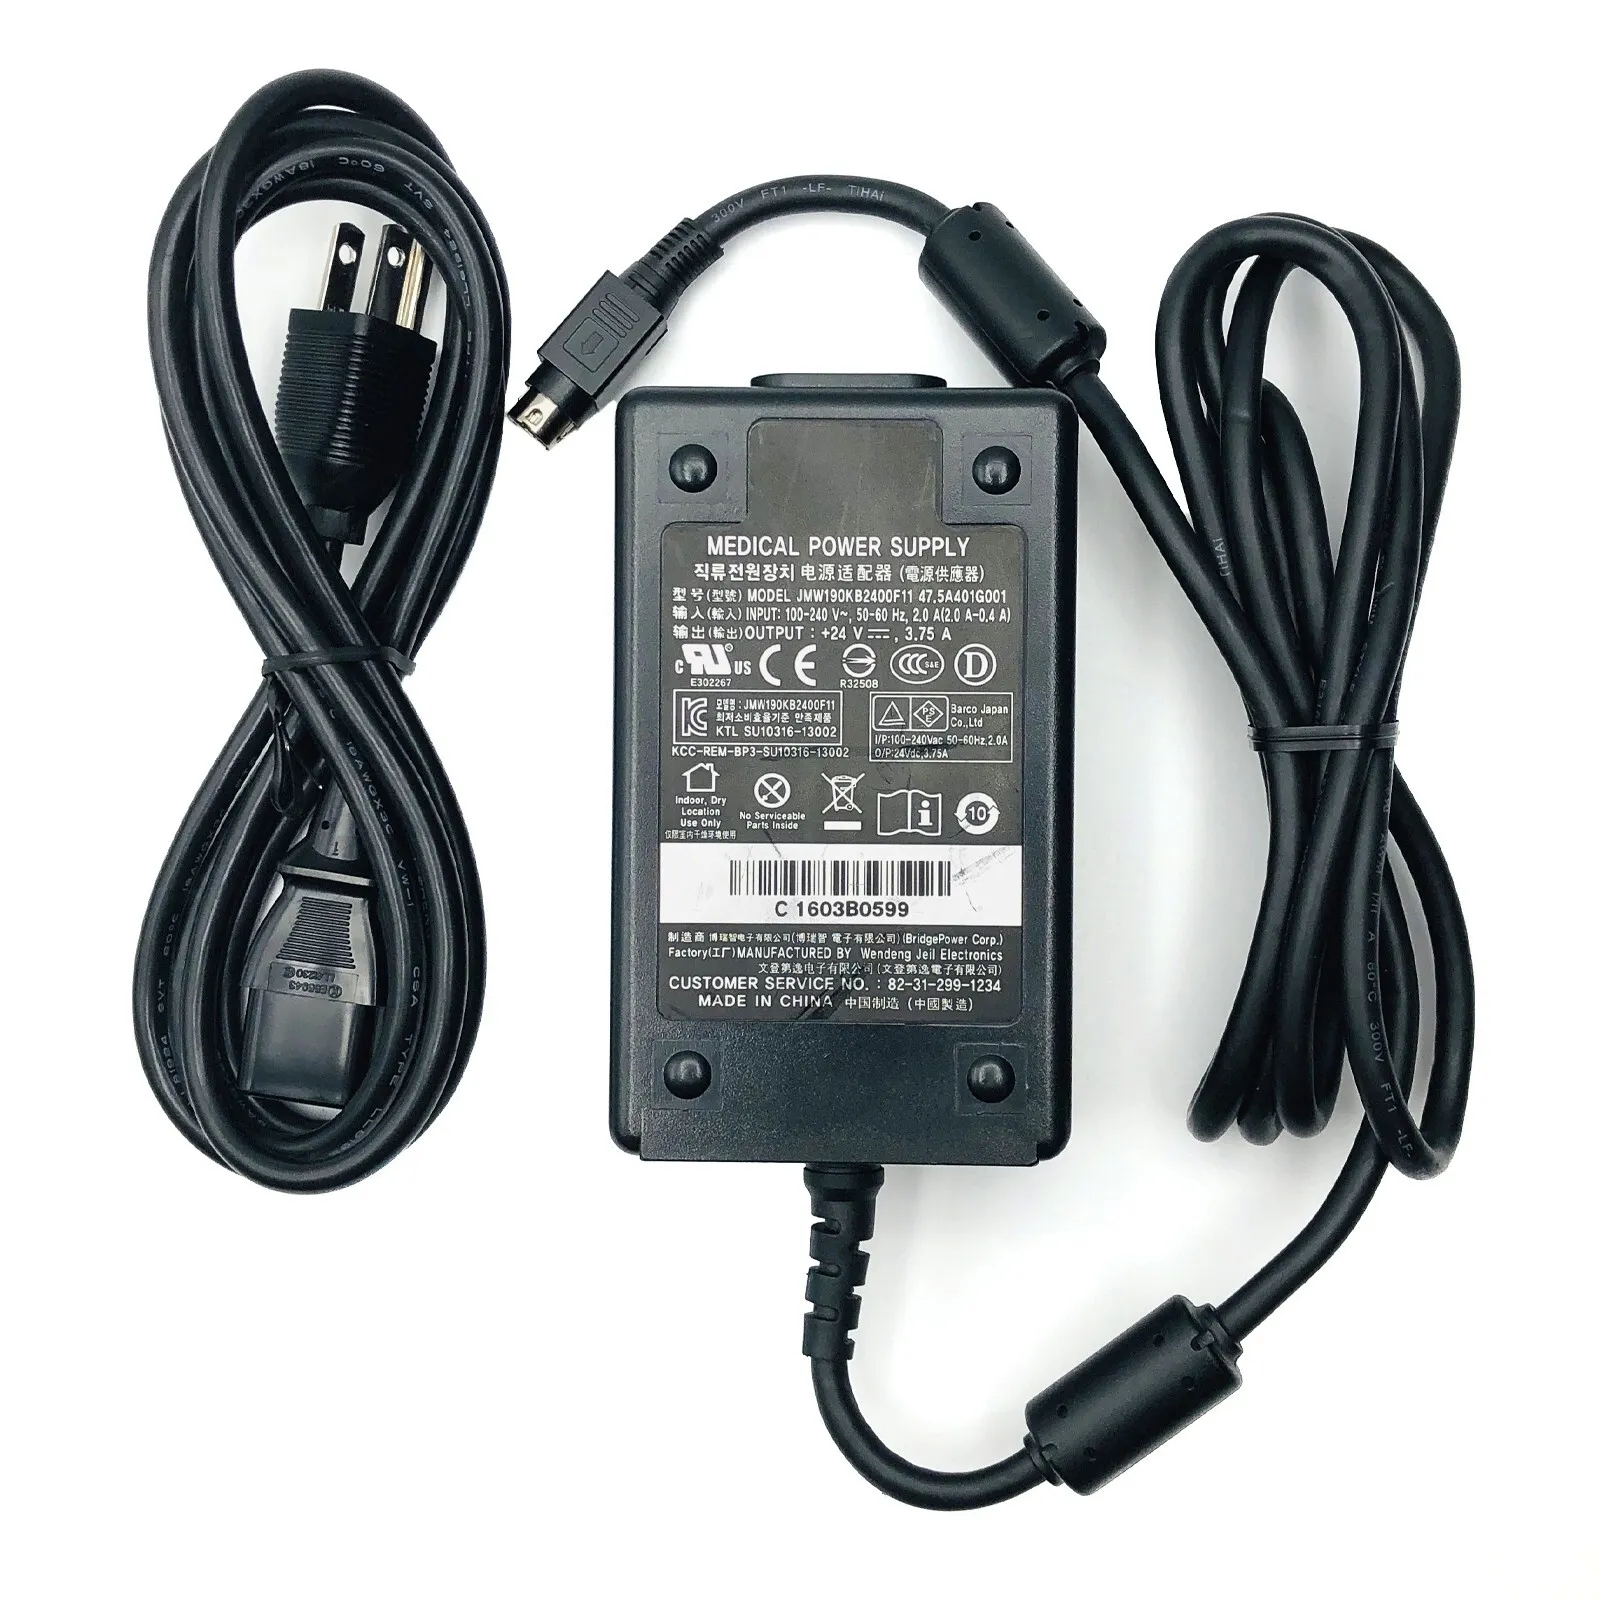 *Brand NEW*24V 3.75A 90W AC Adapter Genuine Wendeng JMW190KB2400F11 Medical Power Supply